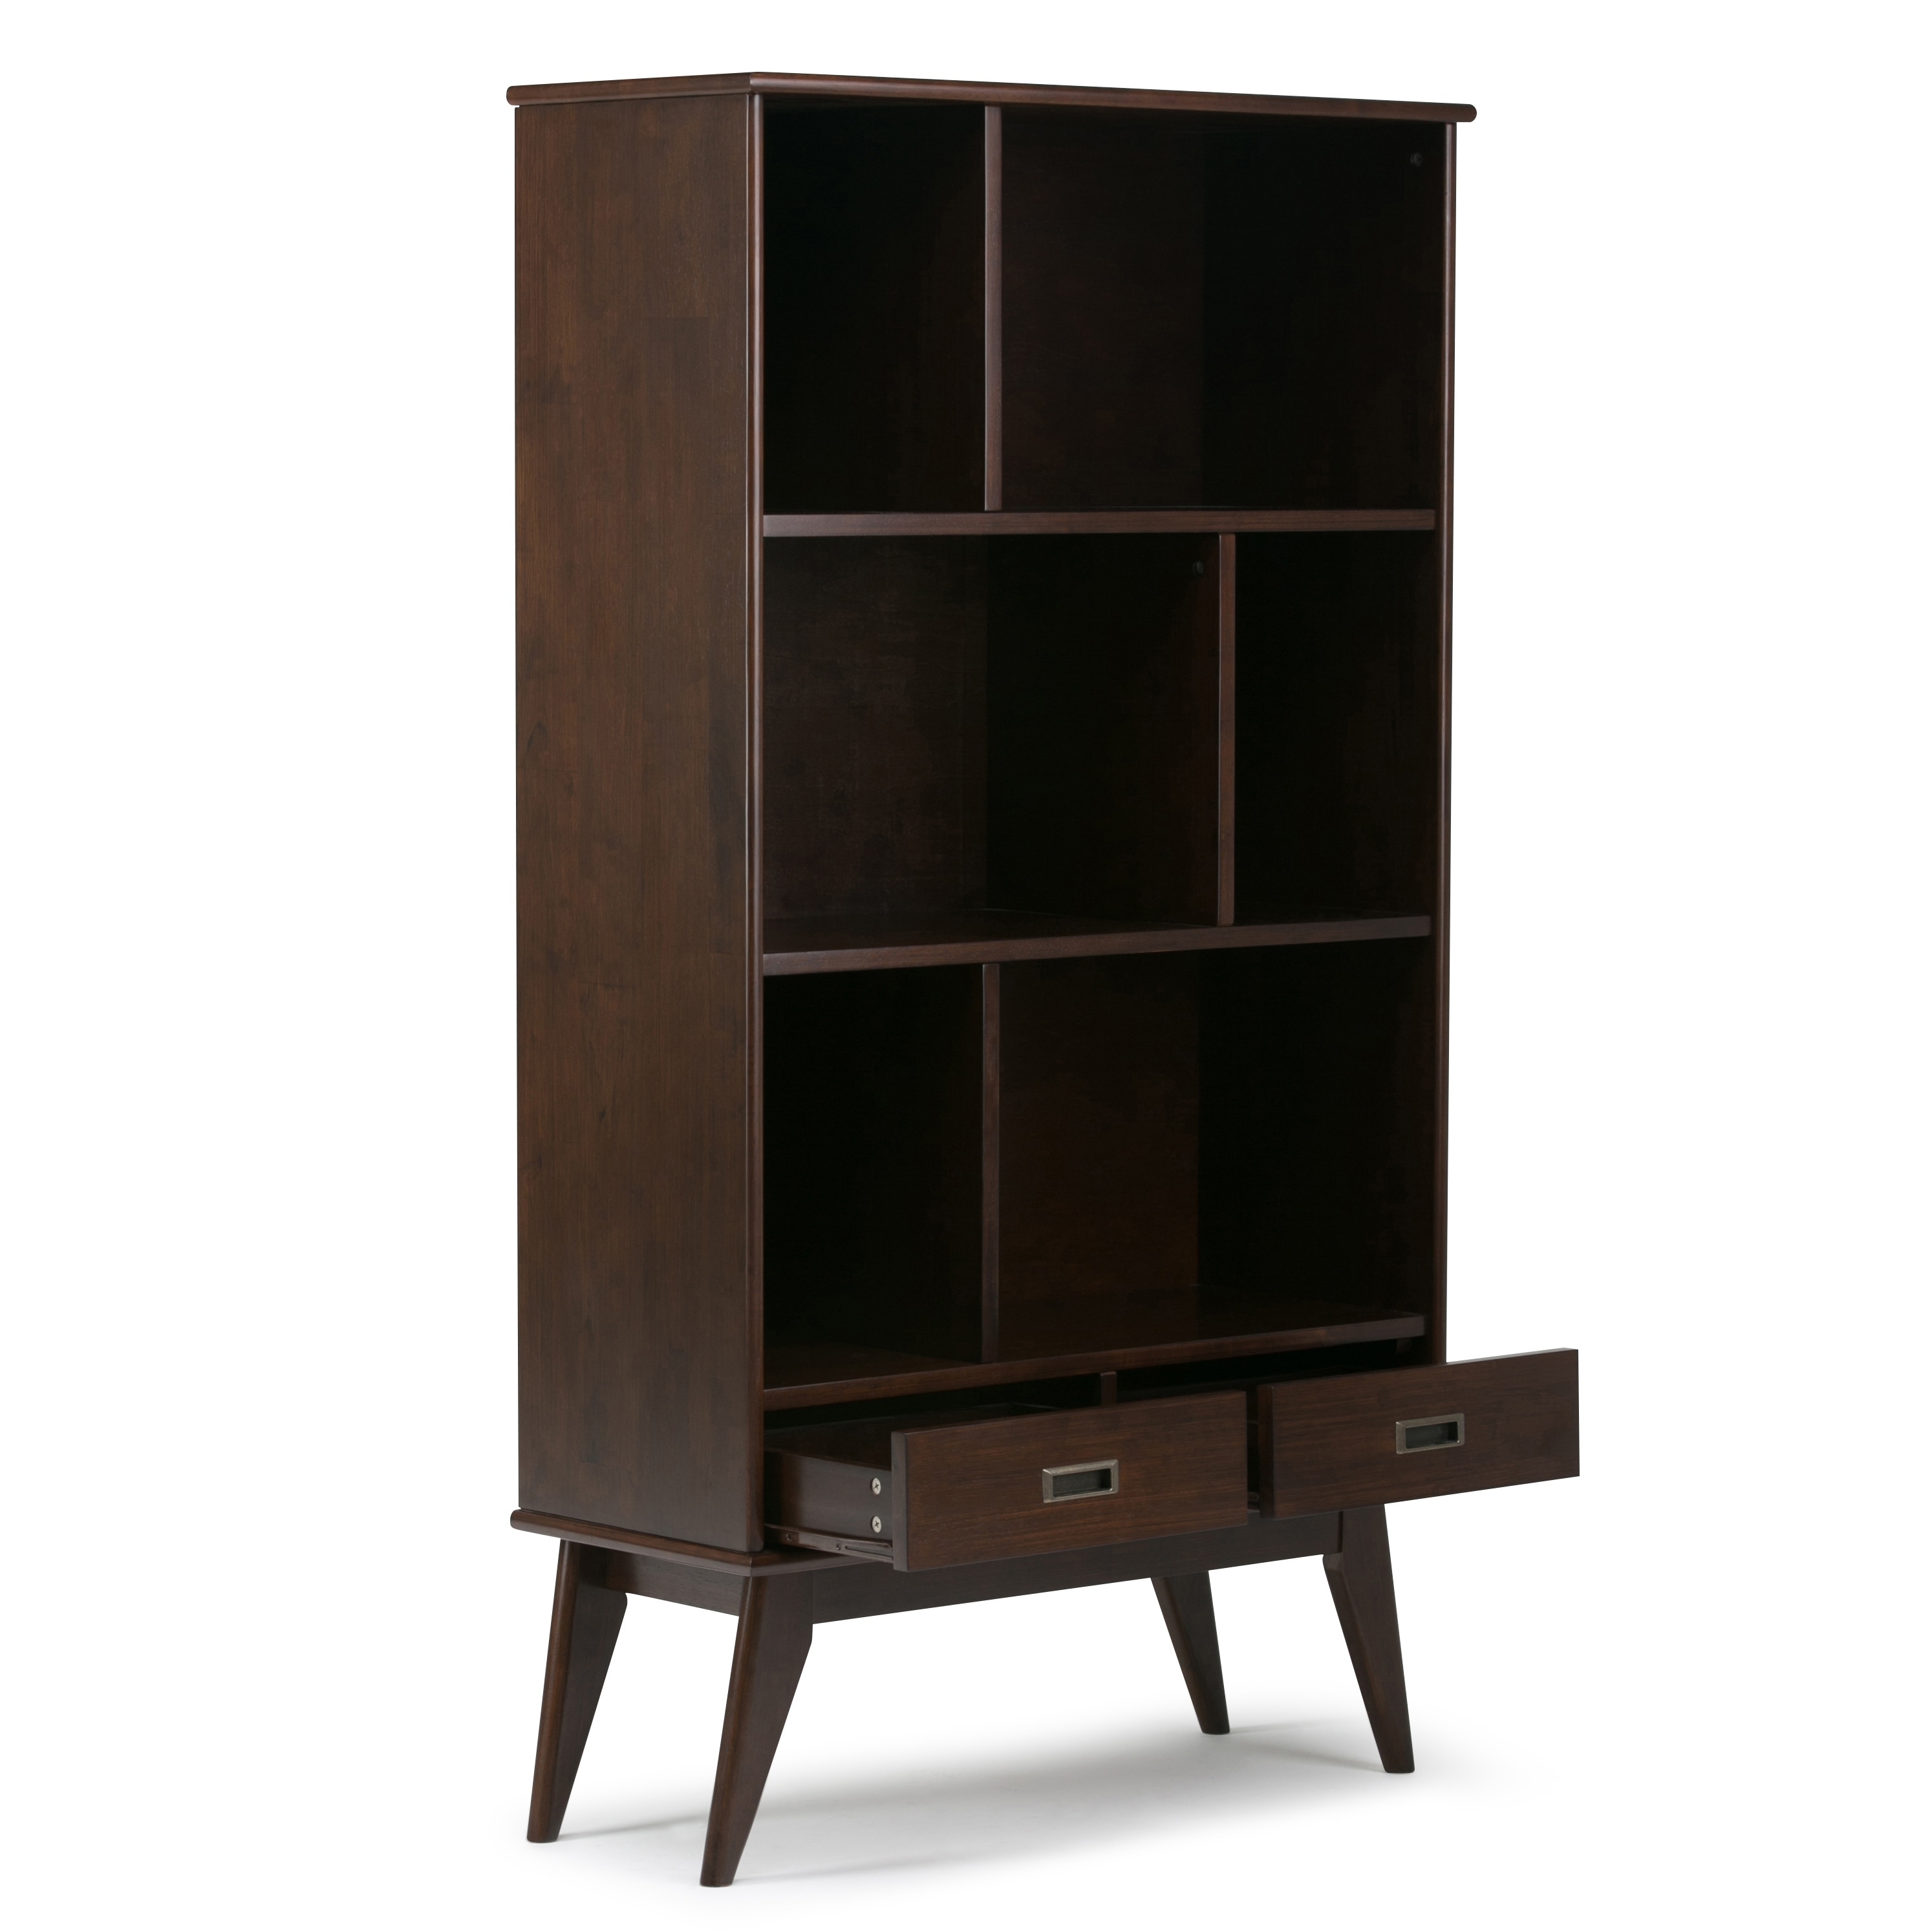 WyndenHall  Tierney SOLID HARDWOOD 64 inch x 35 inch Mid Century Modern Wide Bookcase and Storage Unit - 35"w x 14"d x 64" h Teak Brown Stained - image 4 of 5